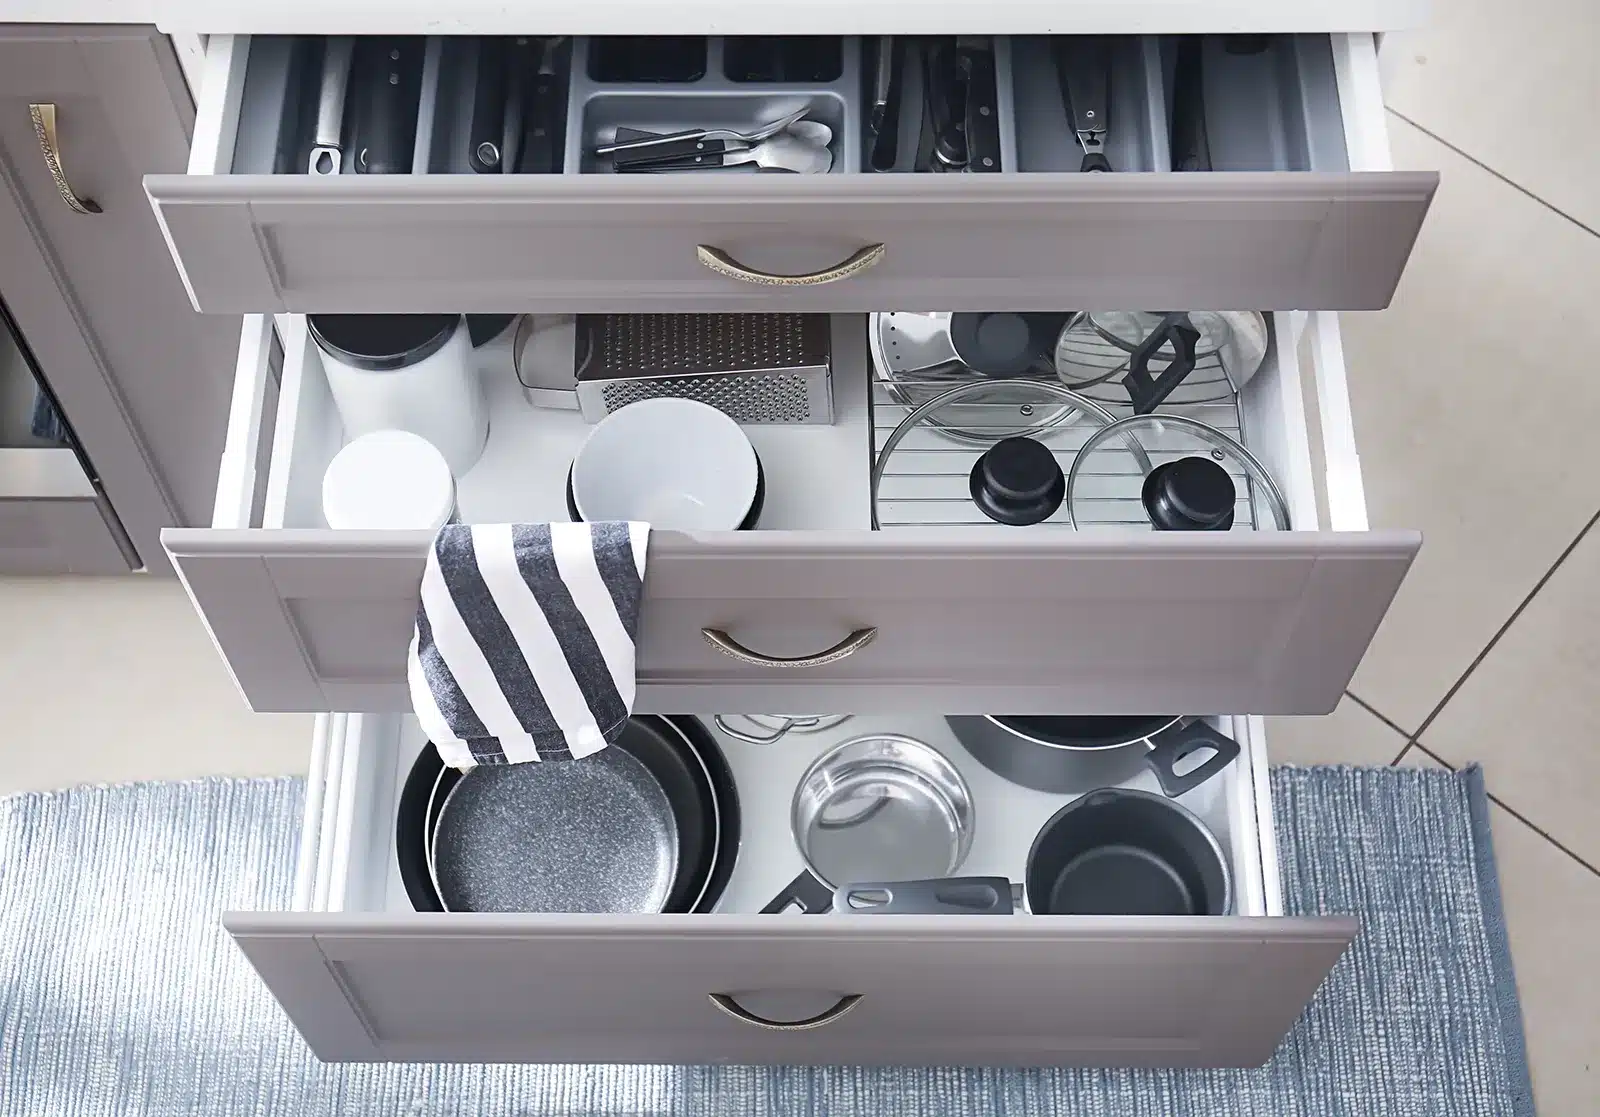 A kitchen showcasing deep drawer storage solutions, neatly organizing pots, pans, and utensils for easy access and efficient space utilization.